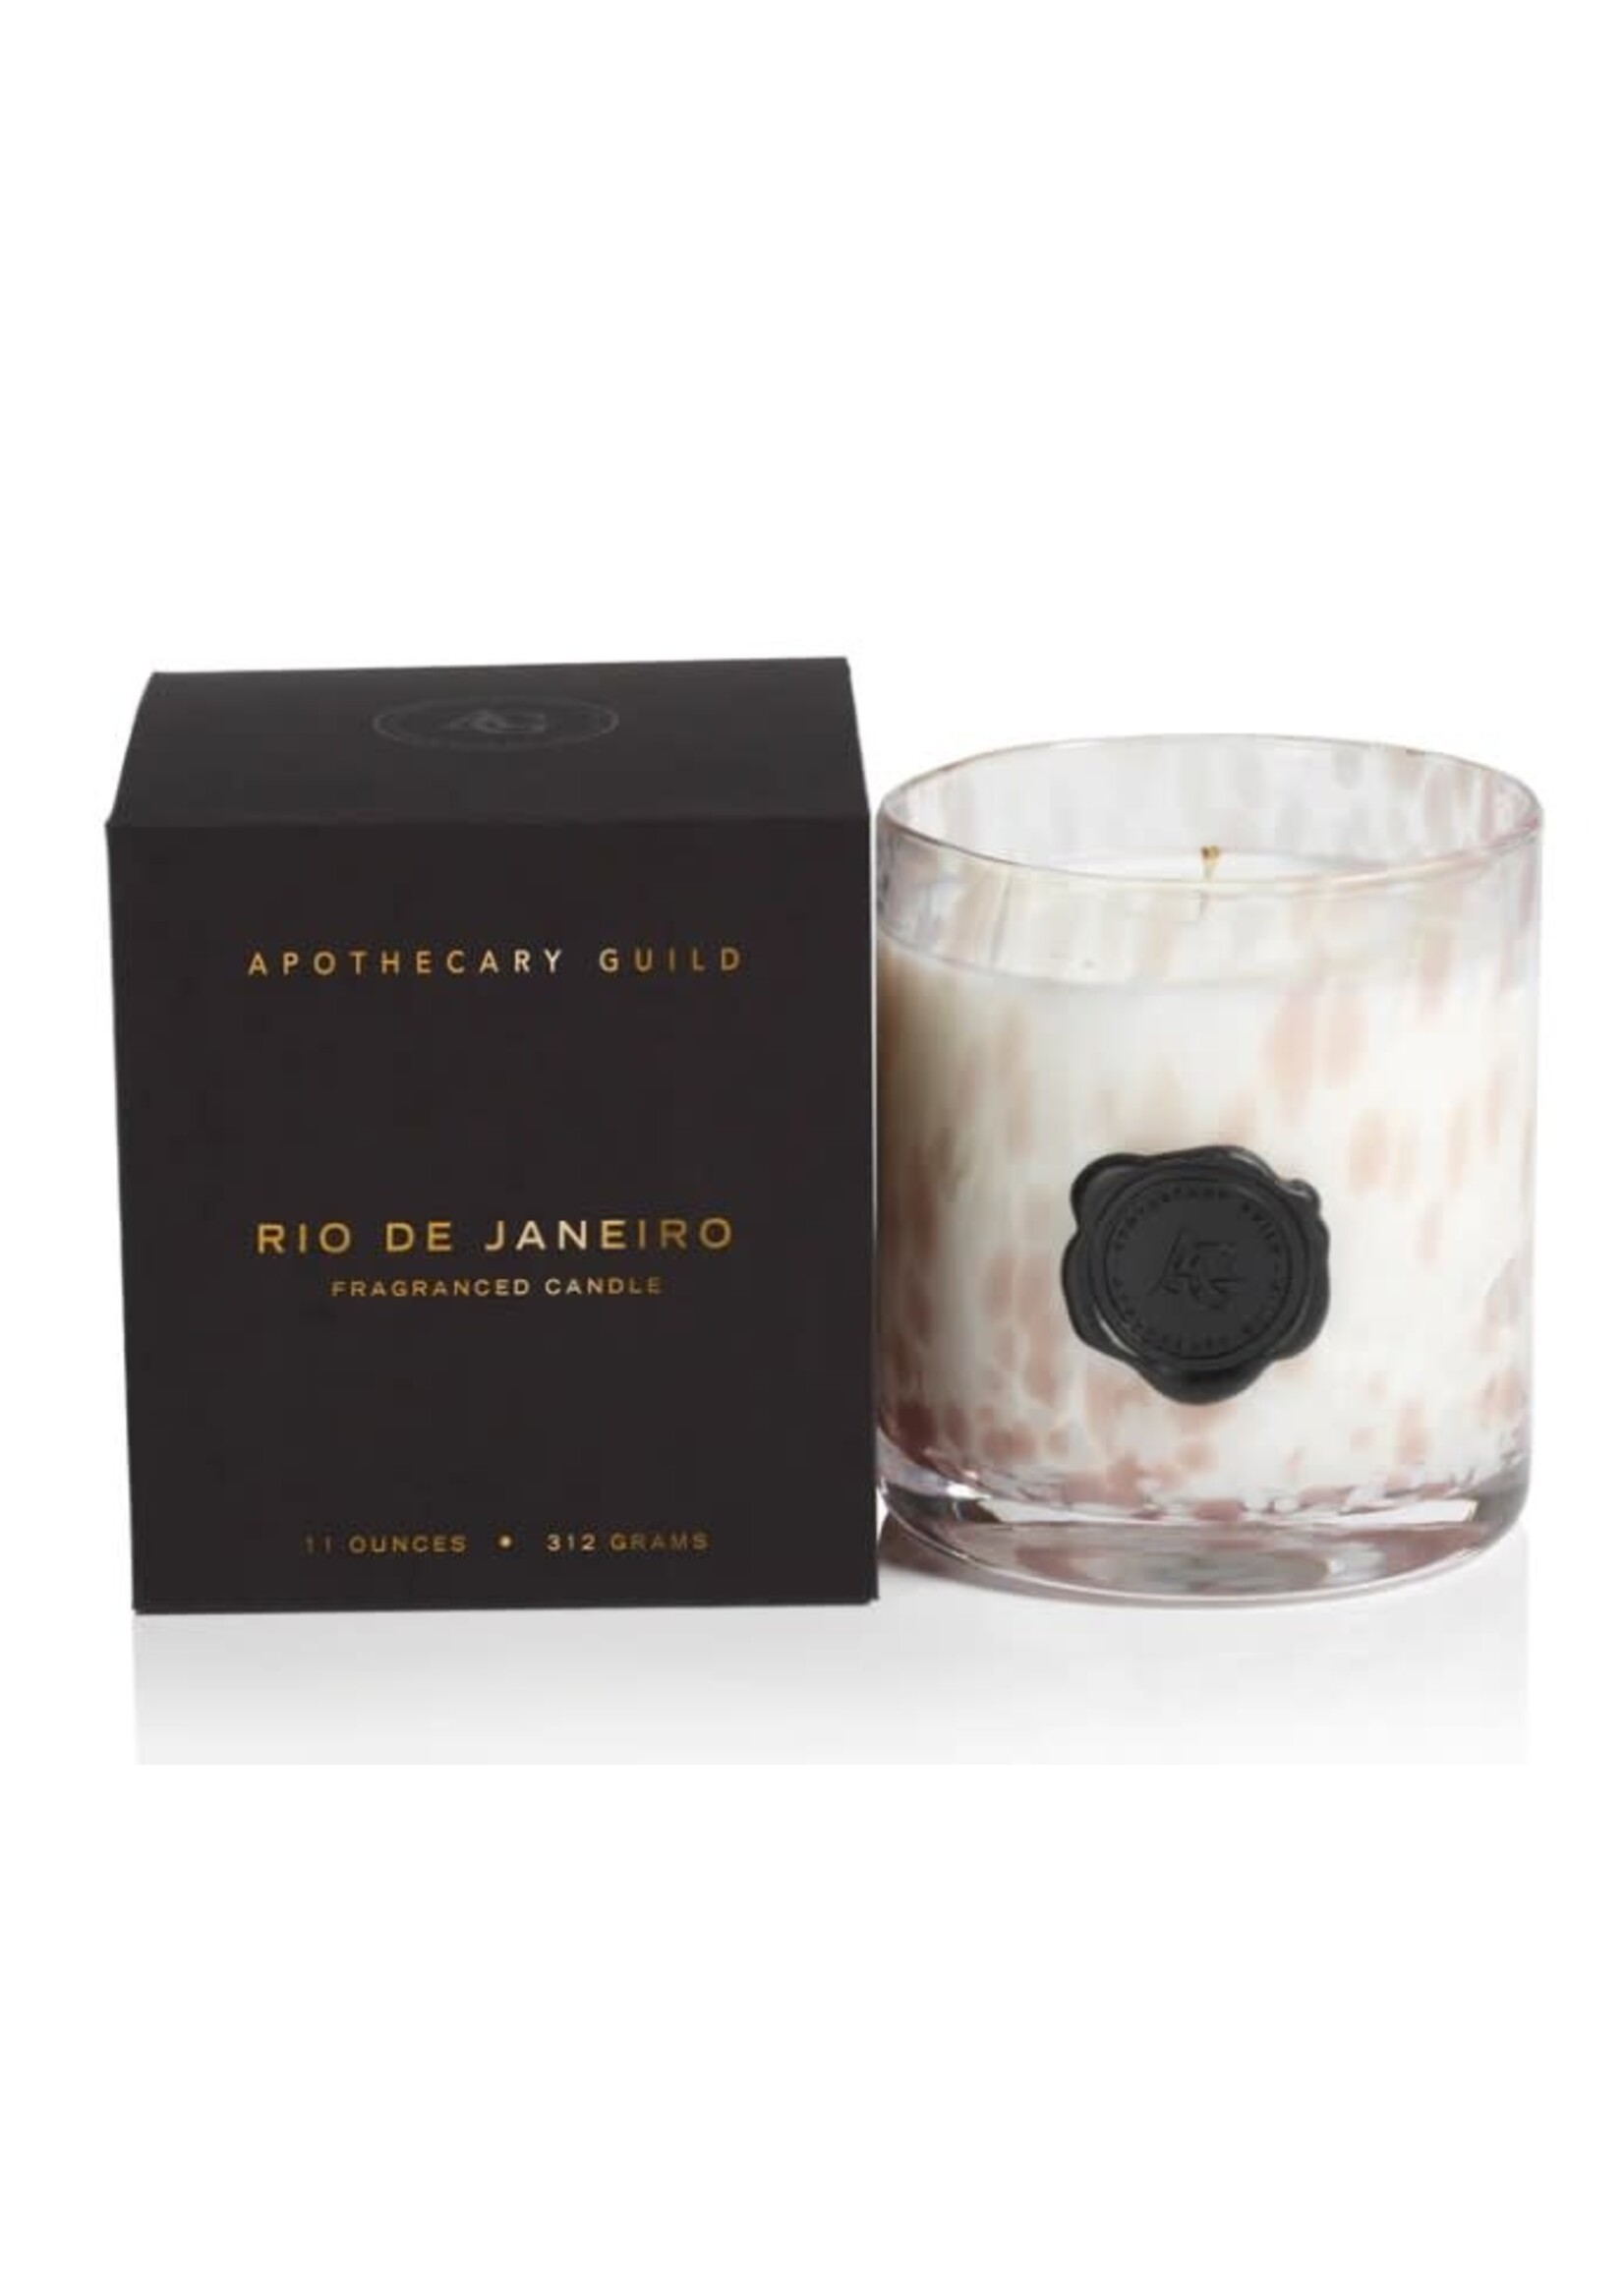 Apothecary Guild Opal Glass Candle Jar in Gift Box